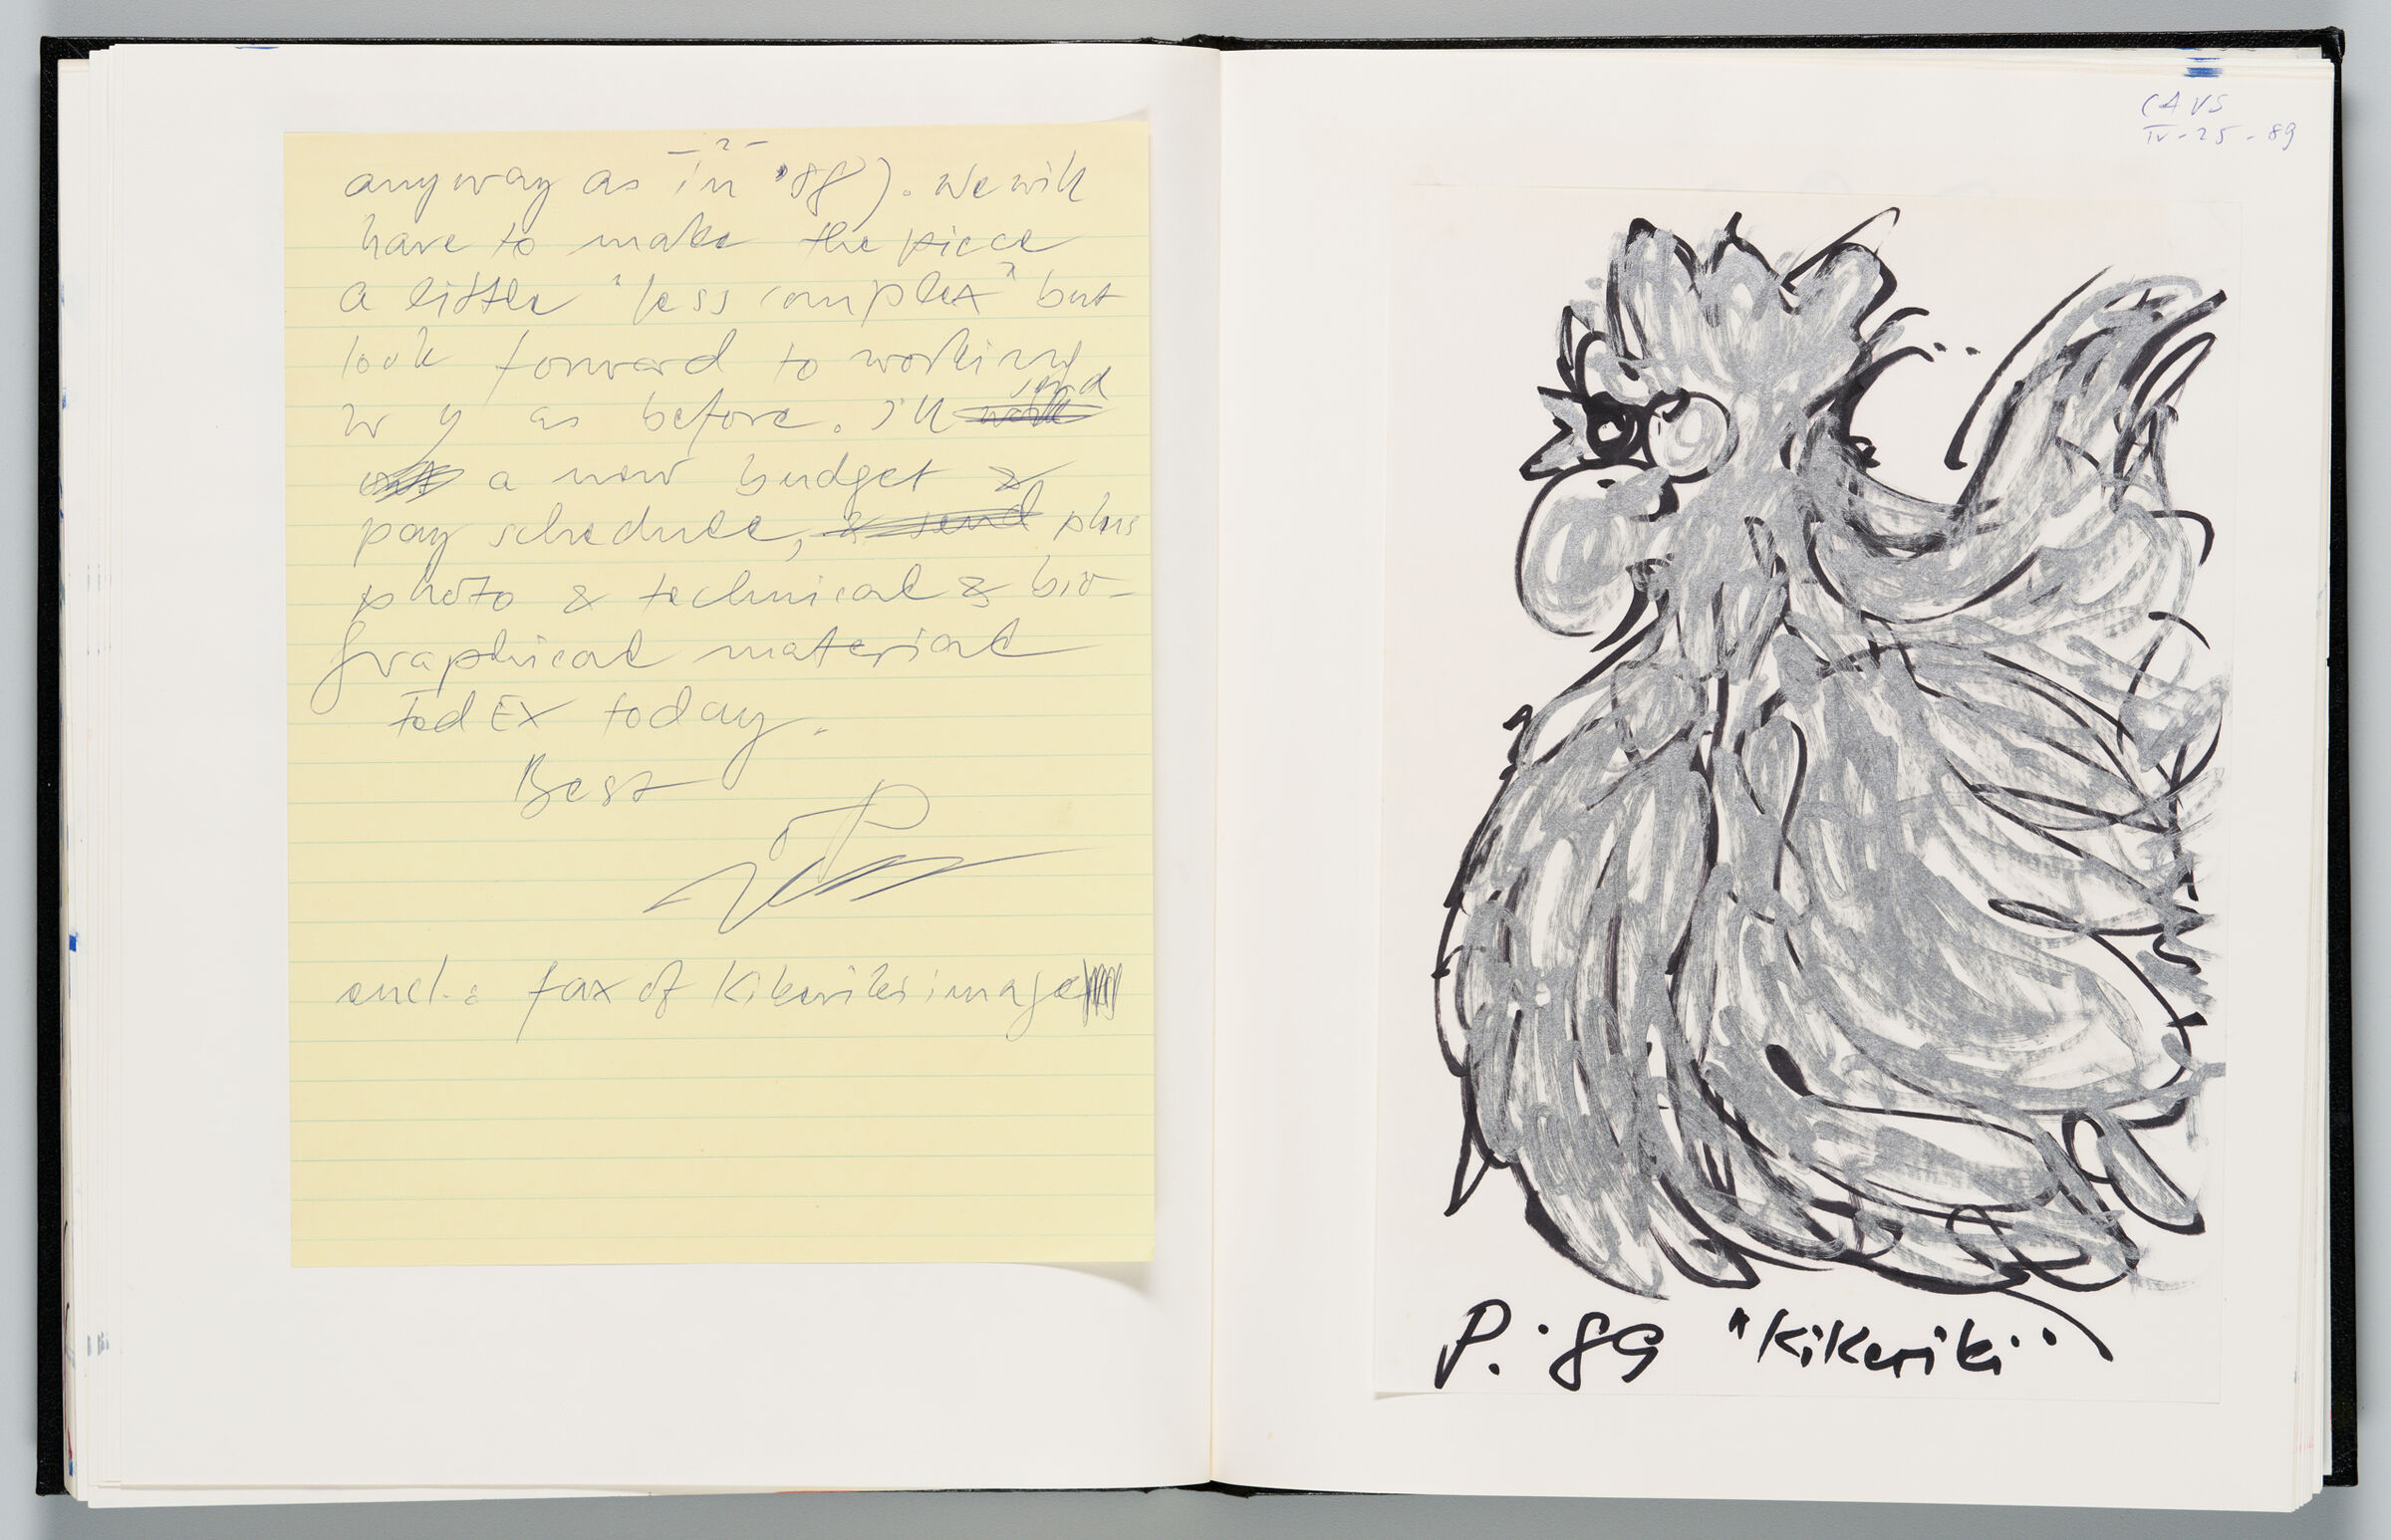 Untitled (Page Of Letter, Left Page); Untitled (Drawing Of Rooster On Paper, Right Page)